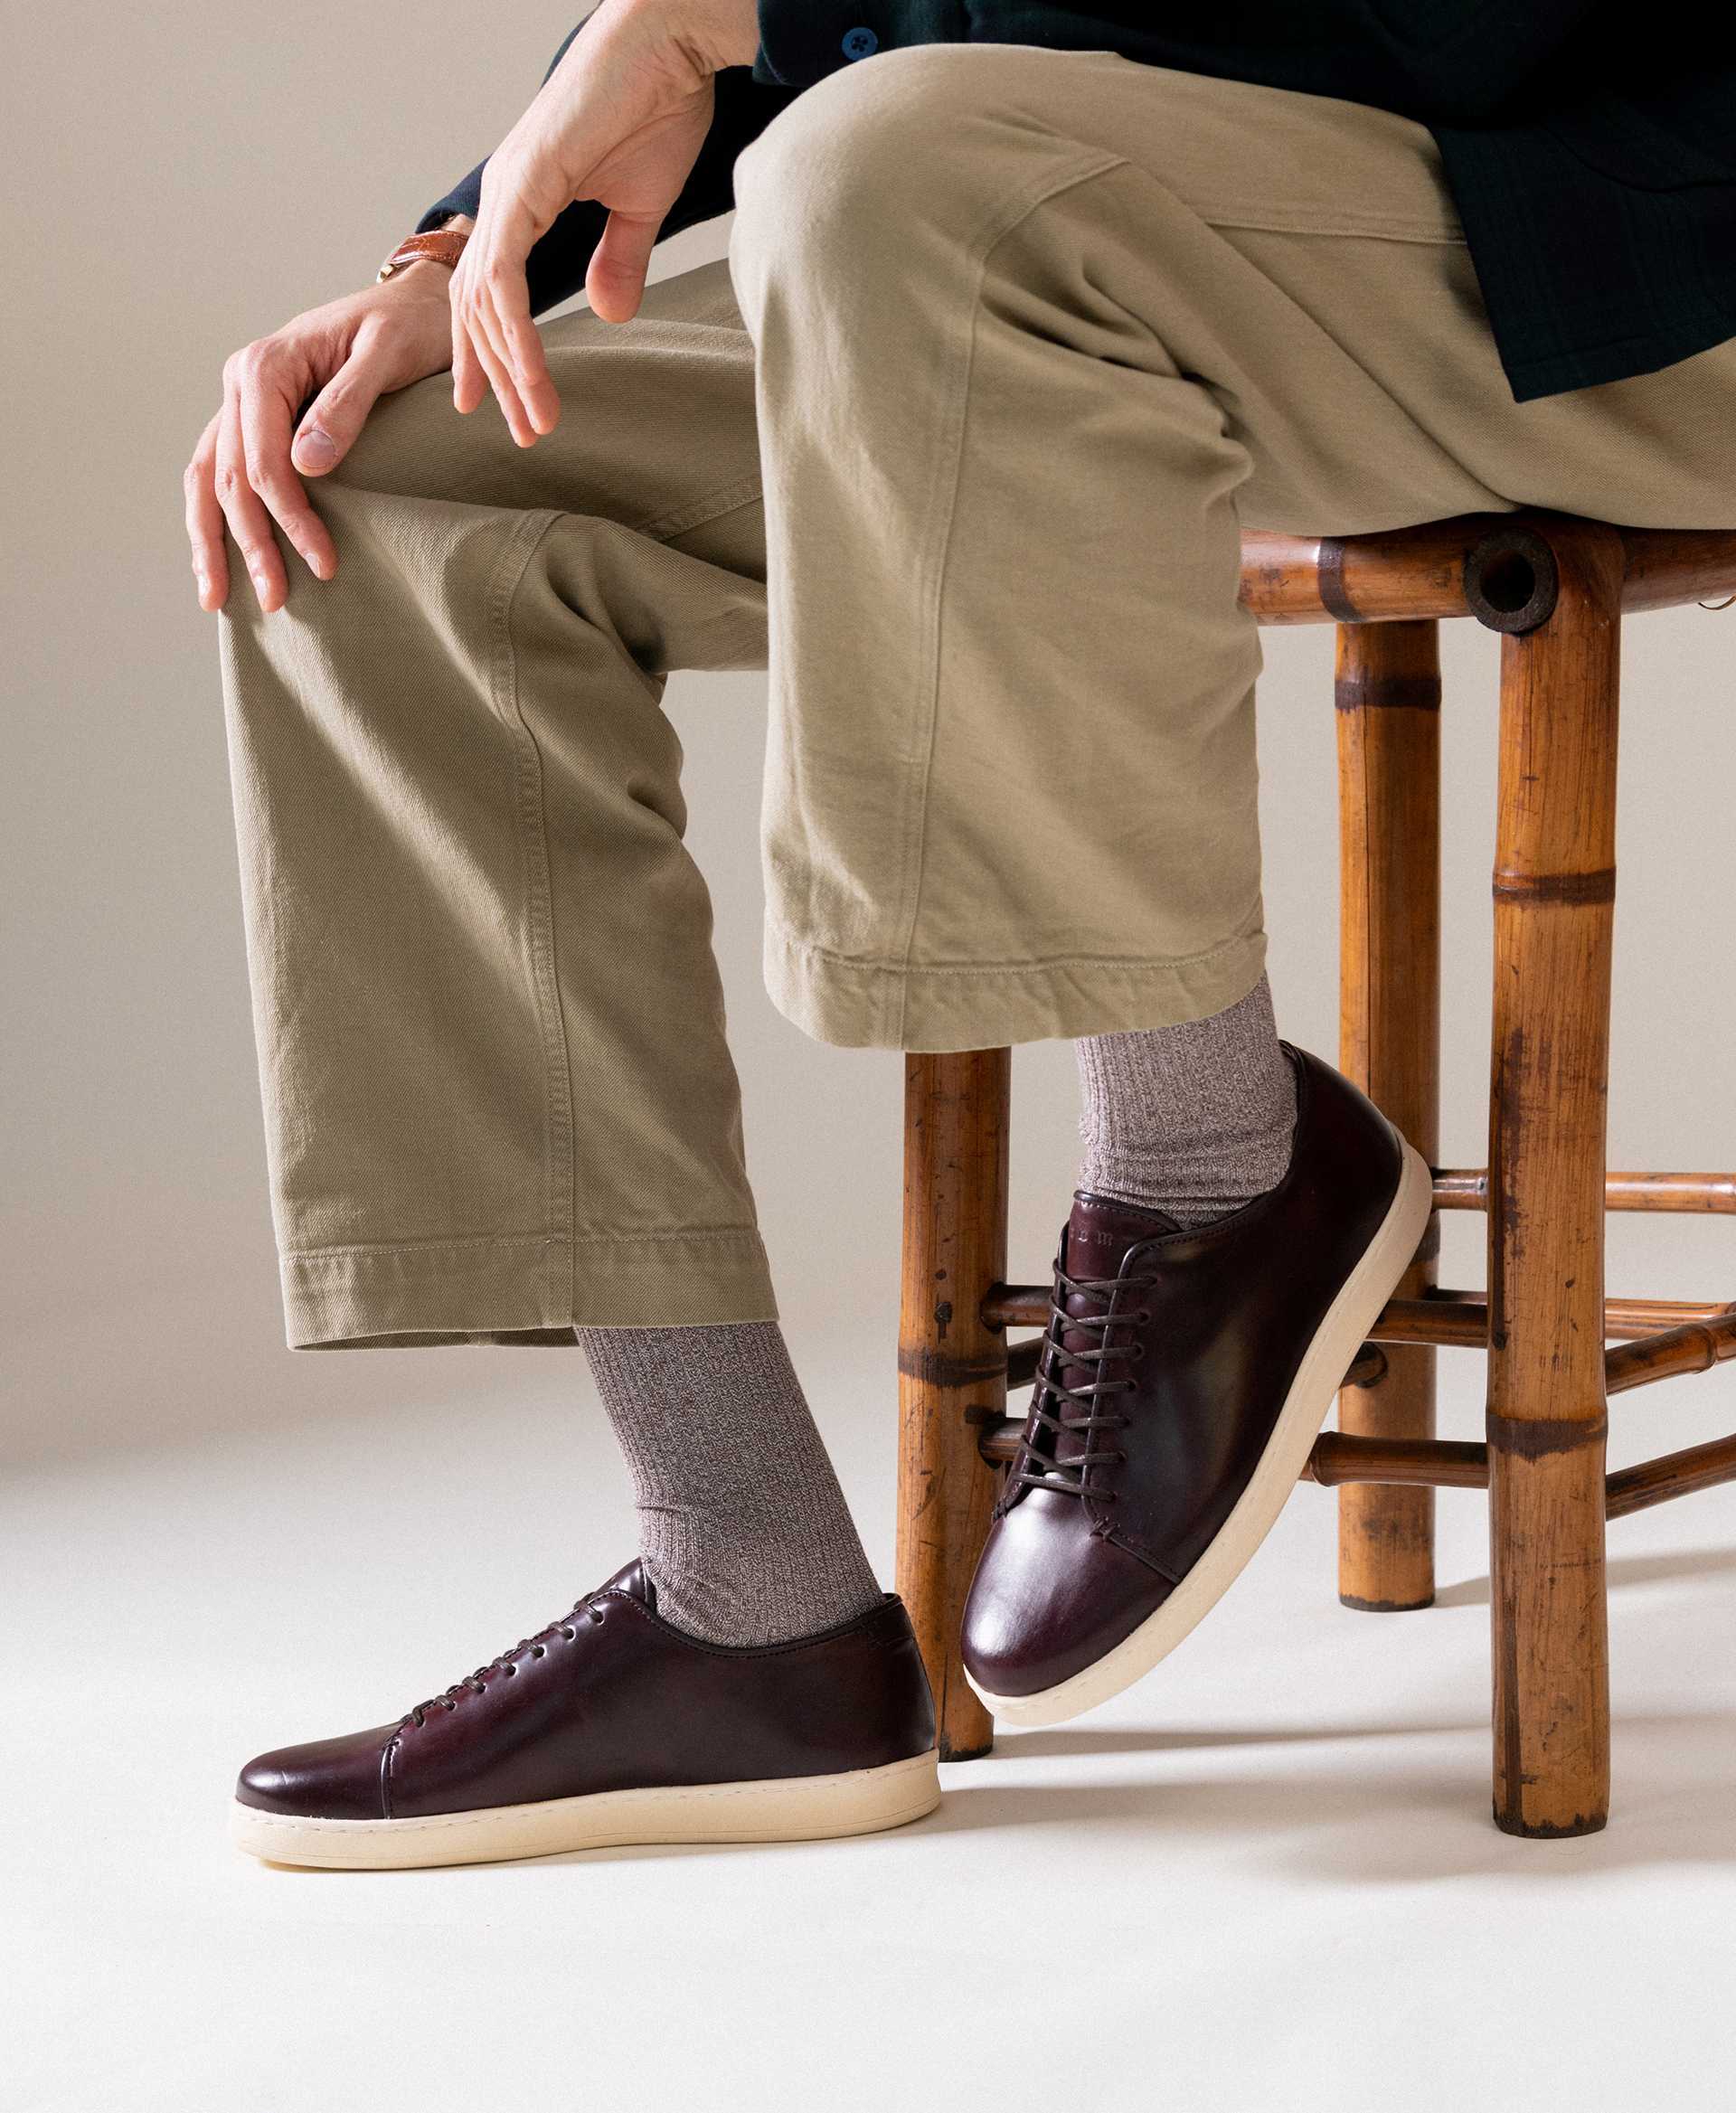 Crown Northampton's made-to-order shoes | Square Mile